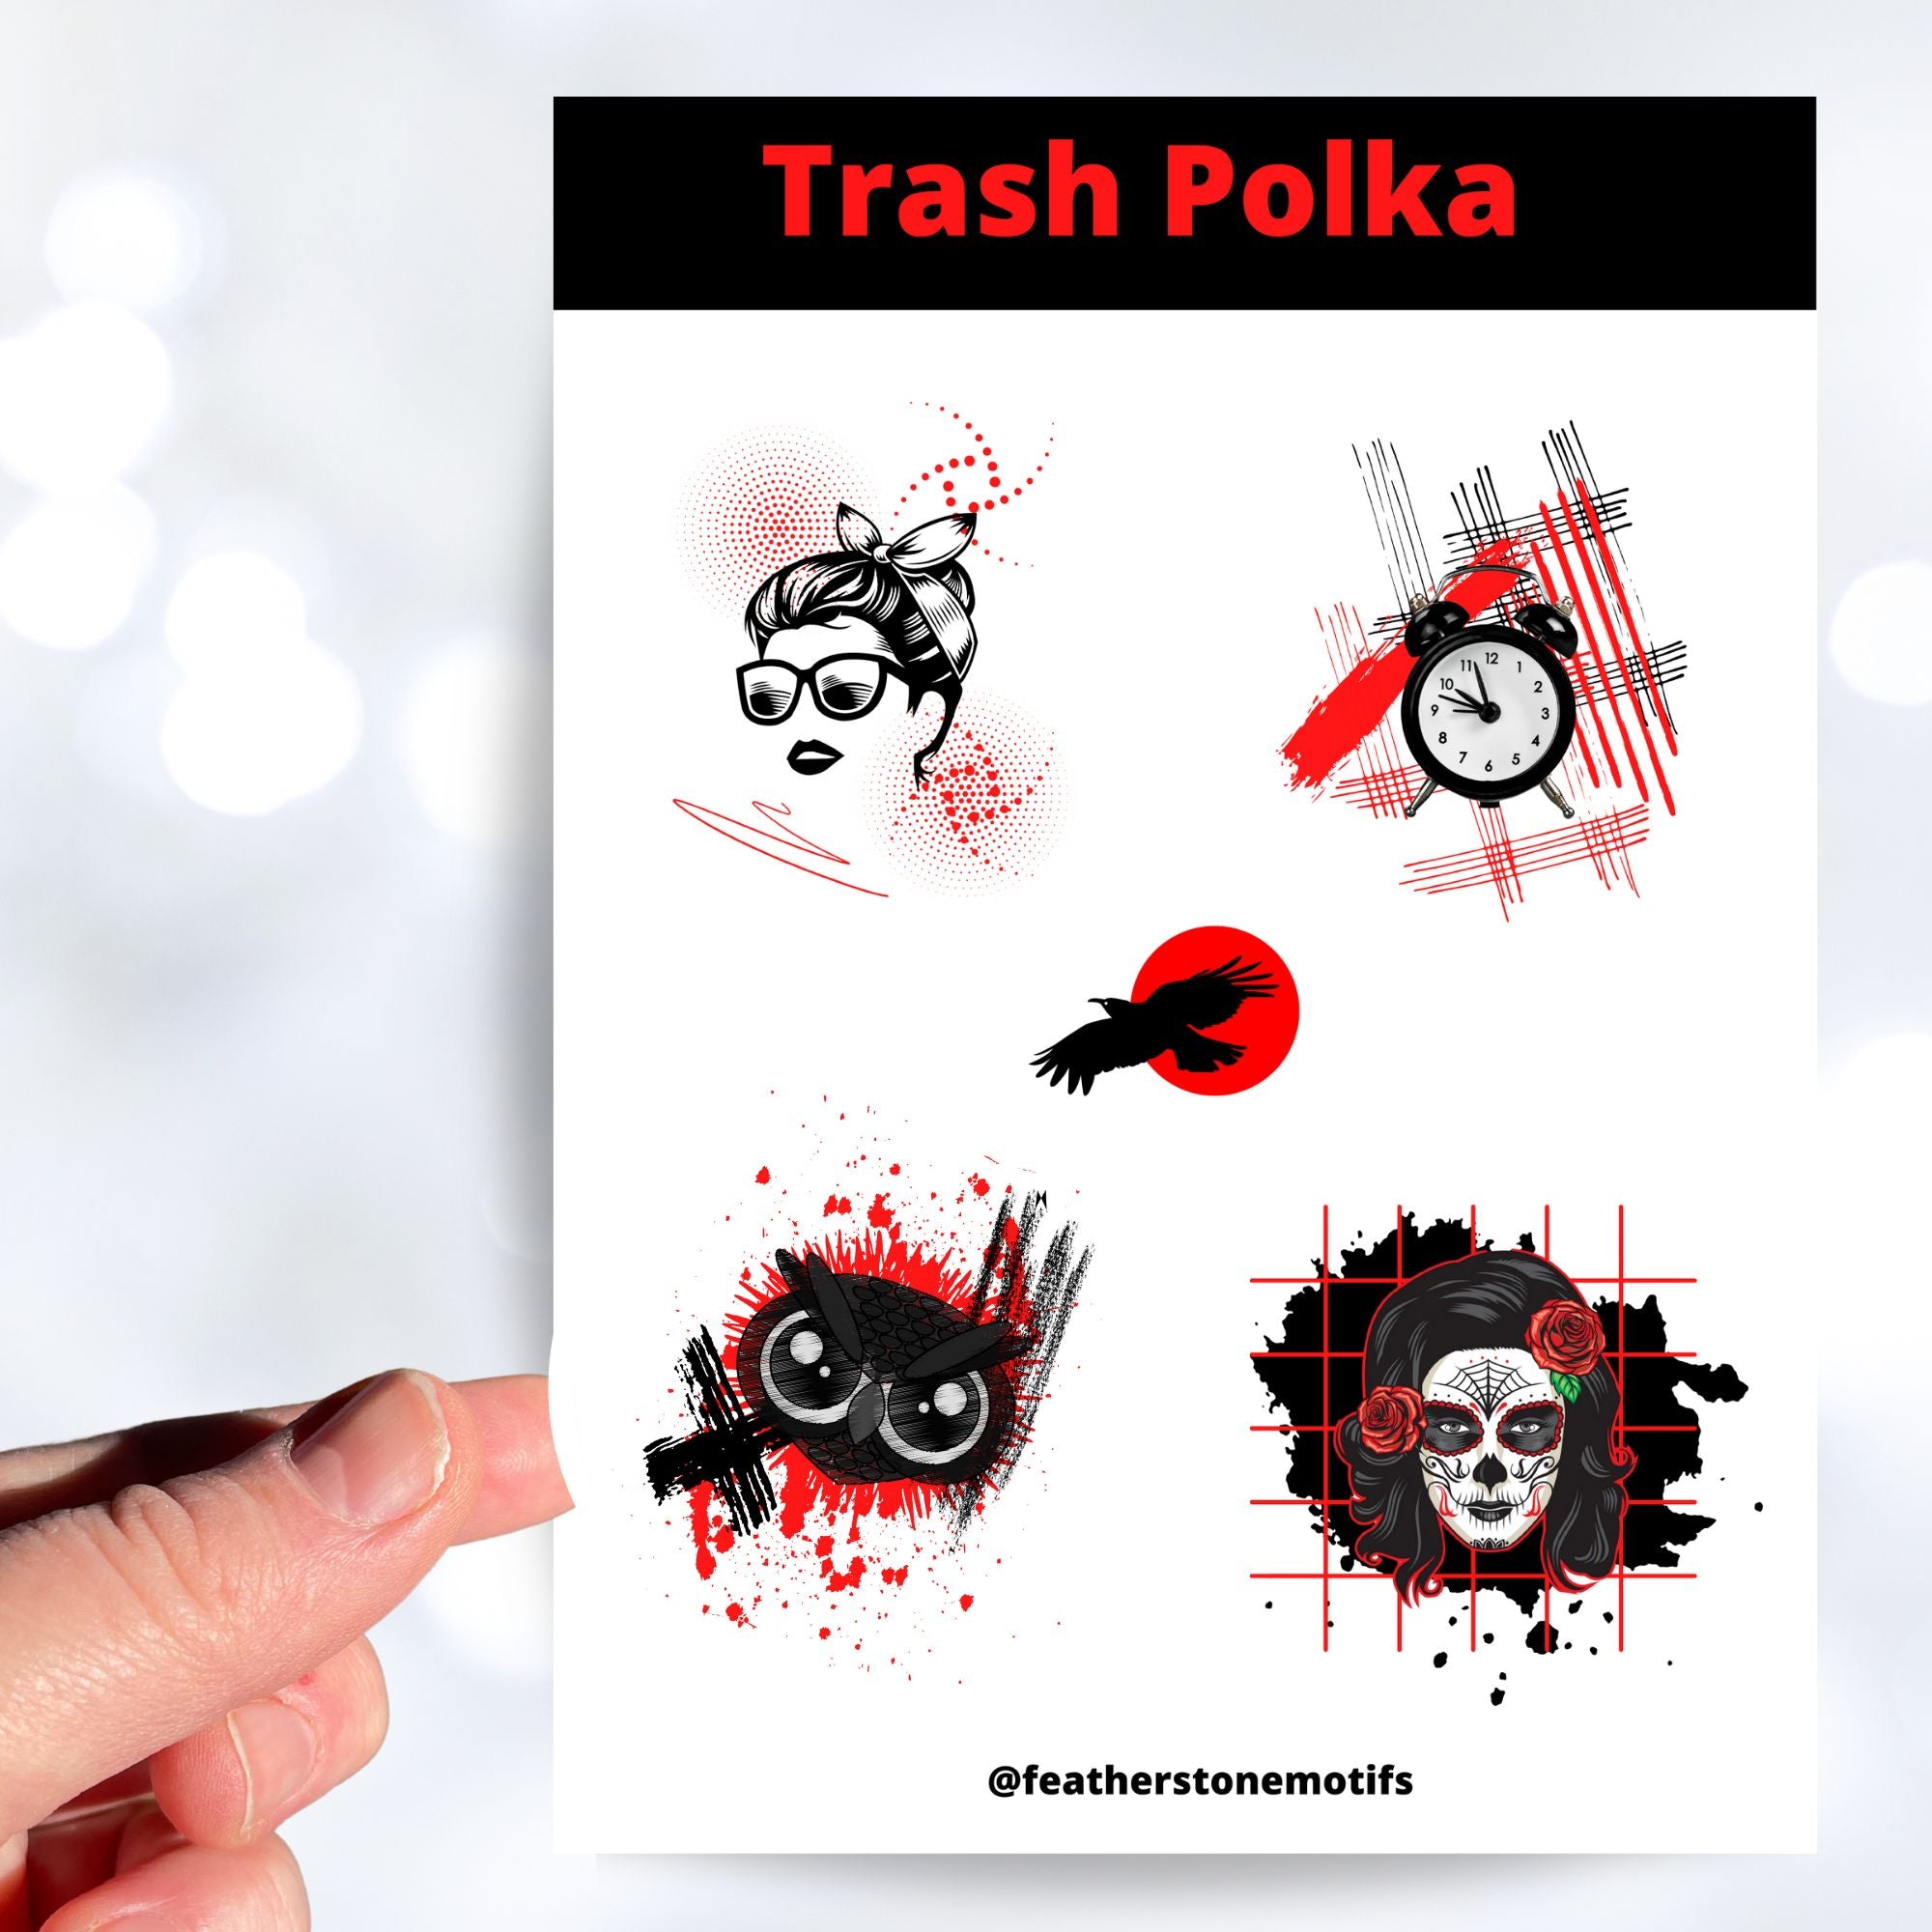 Trash Polka uses red, black, and white with a combination of abstract, surrealistic, and realistic images. This sticker sheet has four larger stickers from our die-cut sticker collection combined with a smaller sticker of a raven flying across a red sun. The stickers are the Trash Polka Woman's face, Trash Polka Clock, Trash Polka Owl, and Trash Polka Sugar Skull Woman. This image shows a hand holding the Trash Polka Owl sticker above the sticker sheet.,